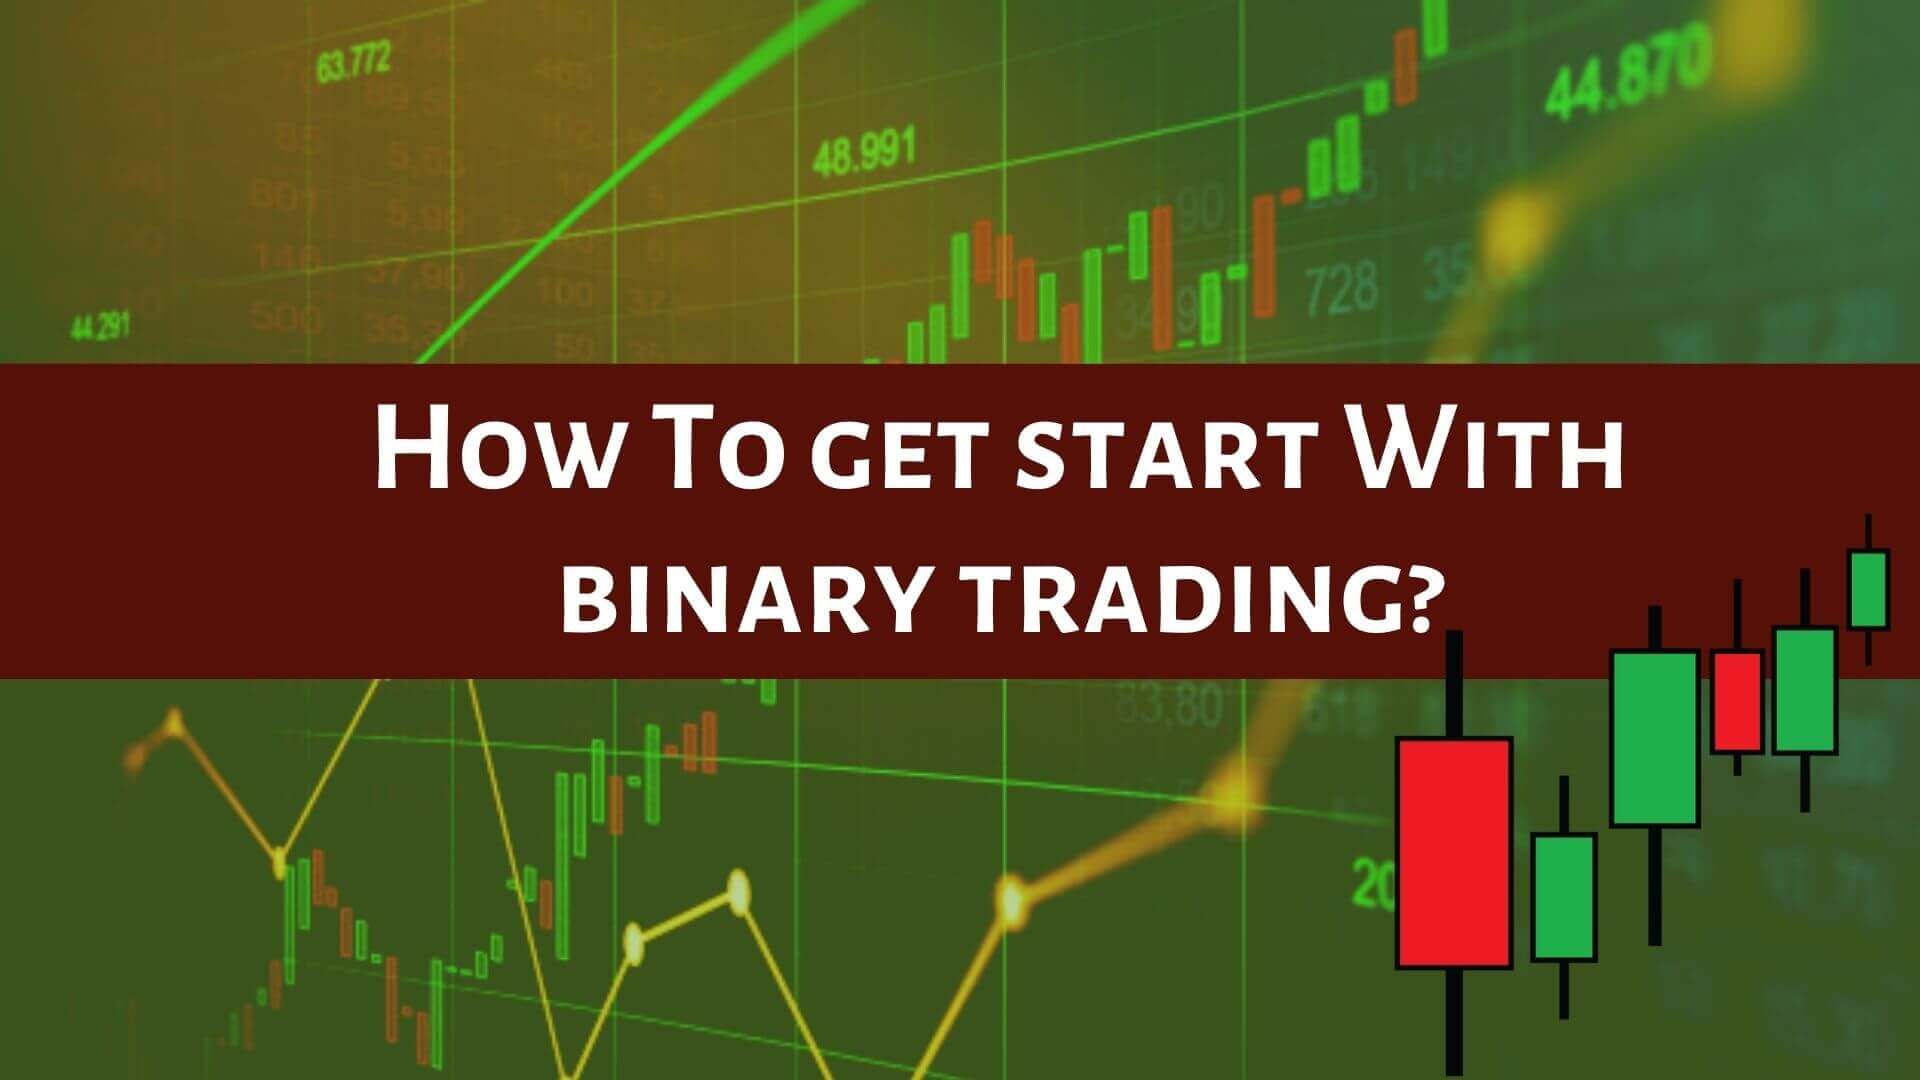 How To Get Start With Binary Options Trading-Binoption